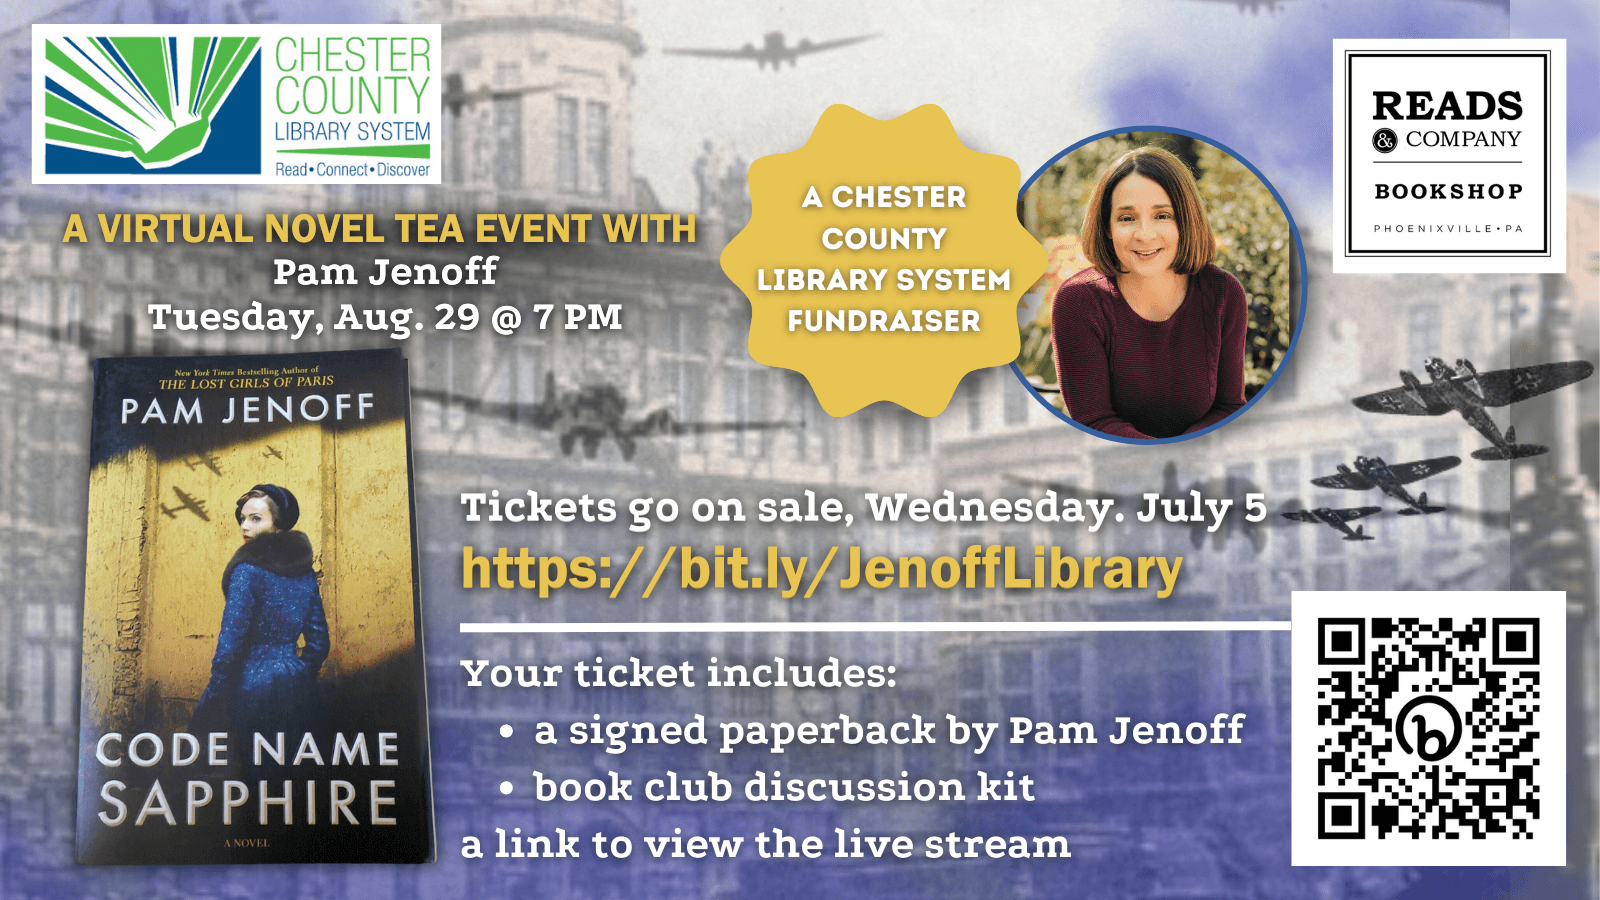 Author Talk with Pam Jenoff benefits libraries.